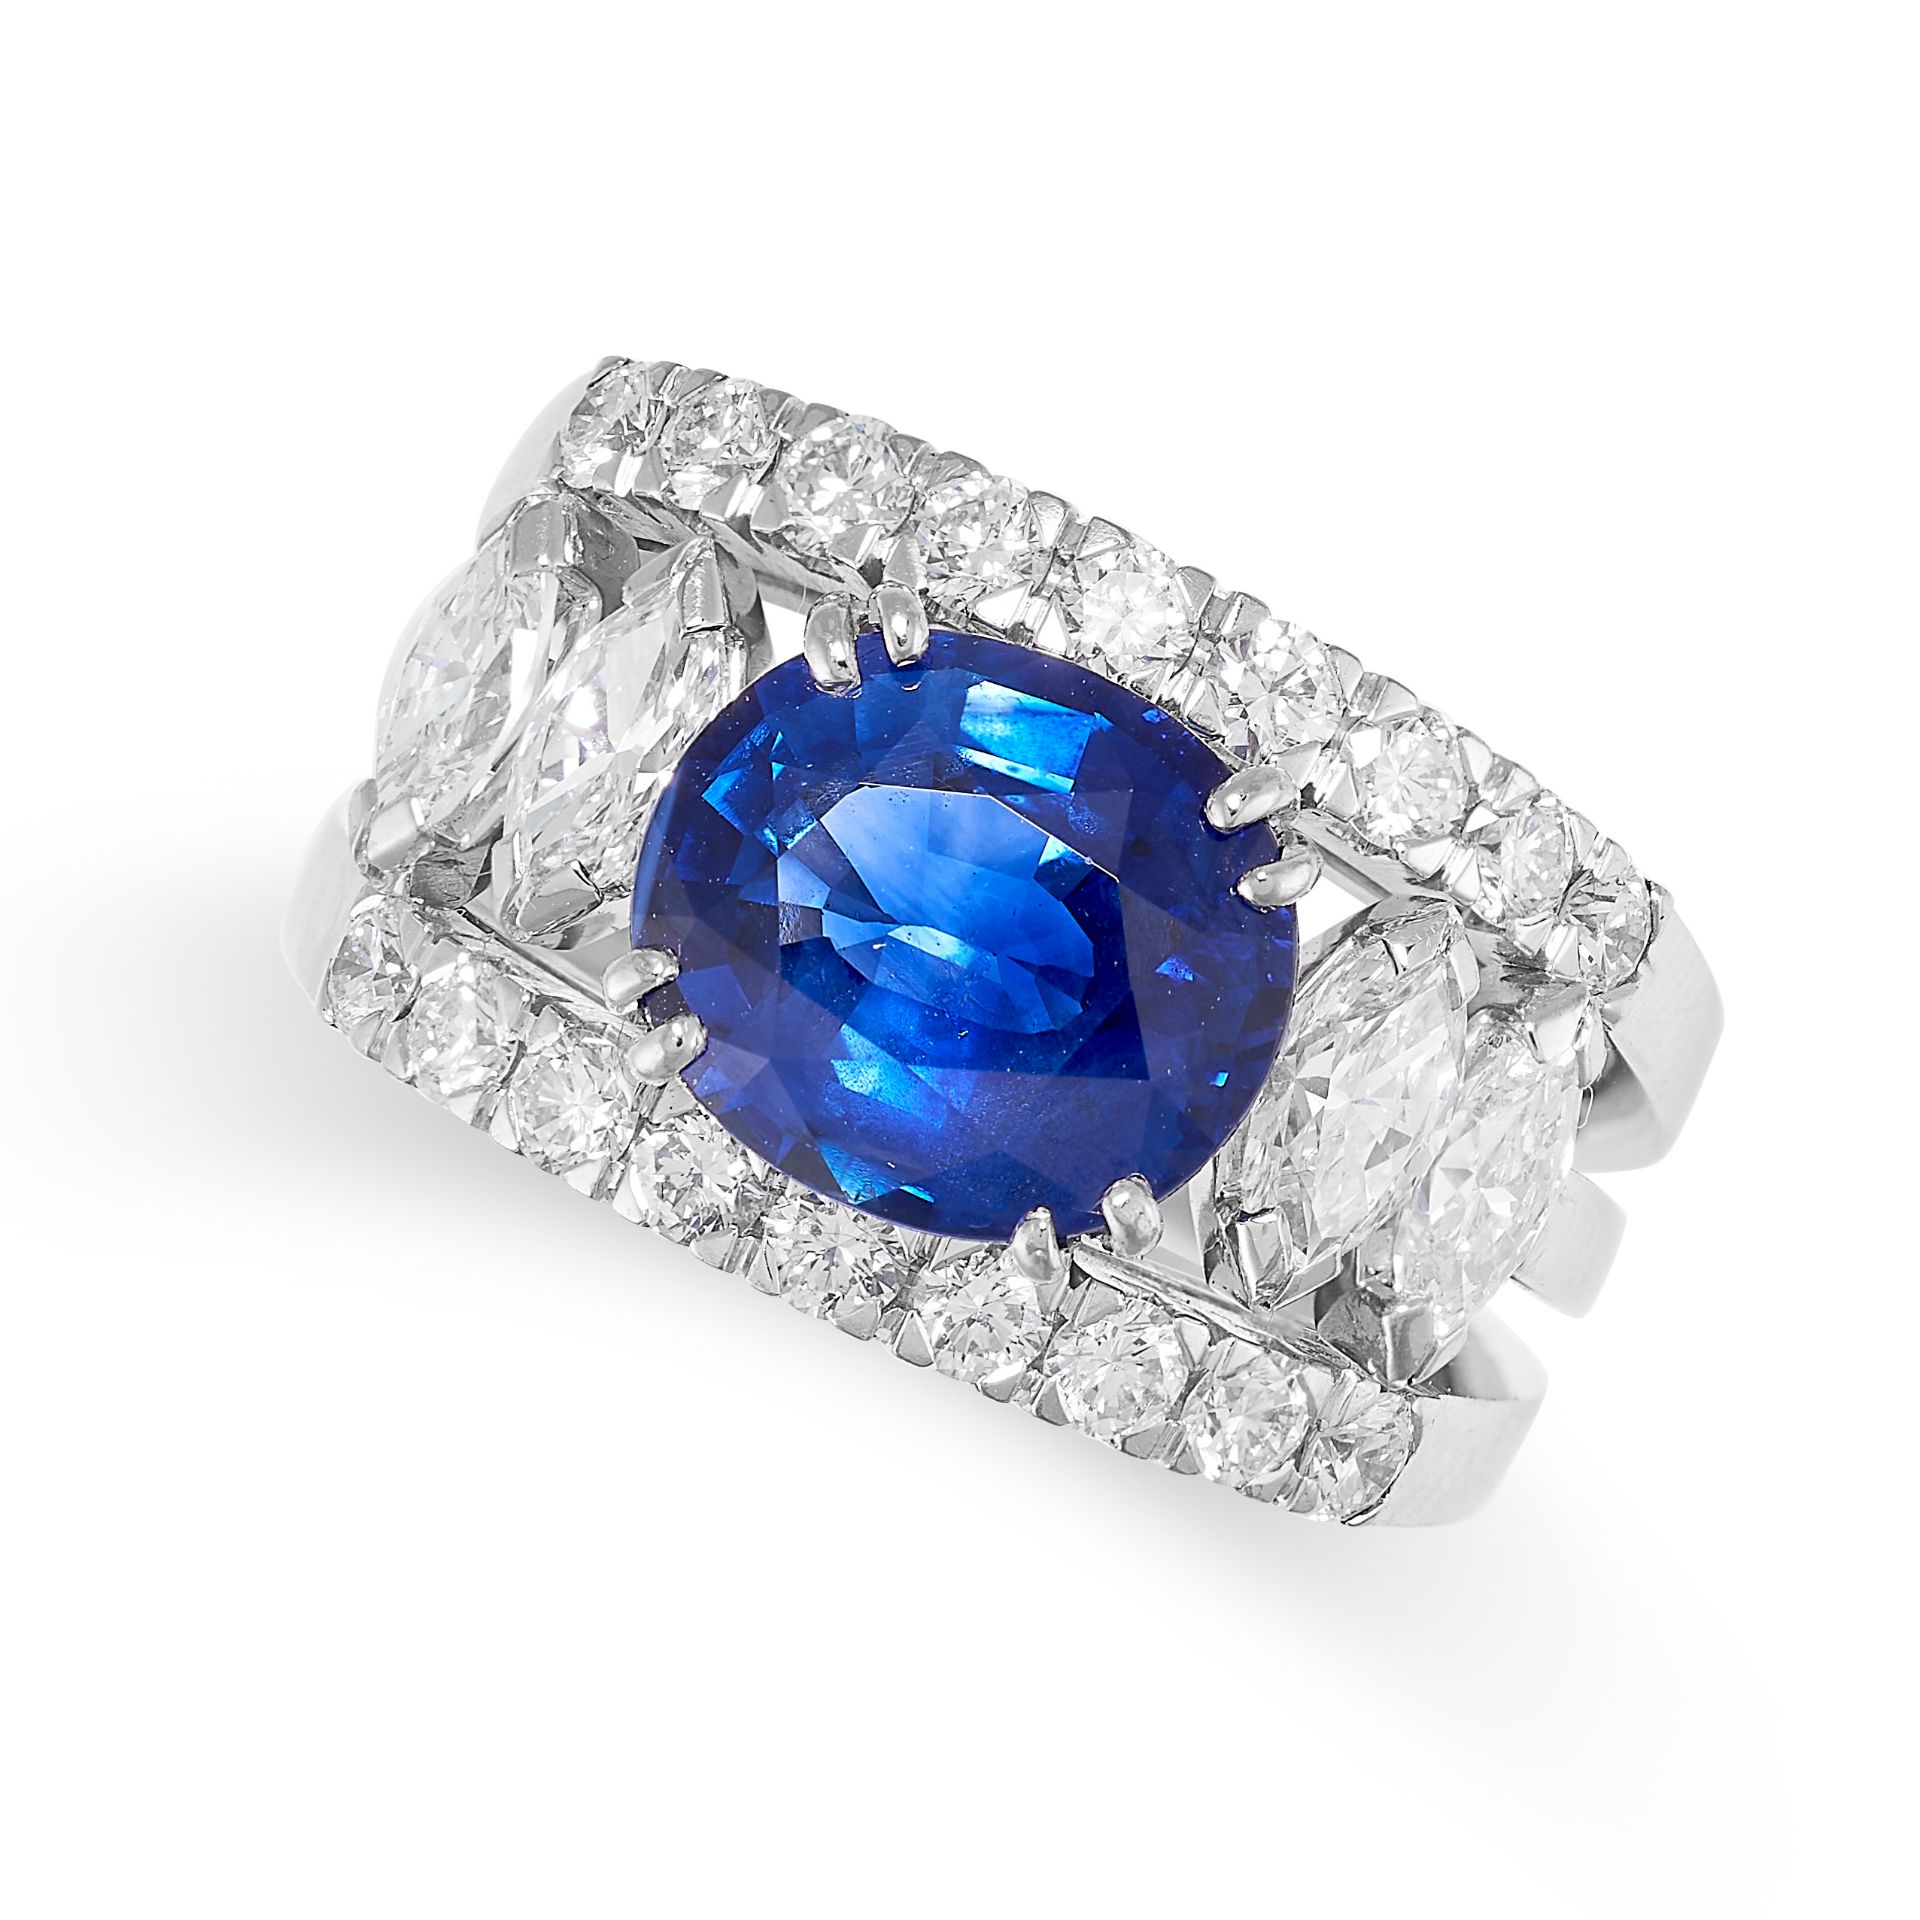 A SAPPHIRE AND DIAMOND RING in 18ct white gold, comprising a cushion cut sapphire of 2.76 carats set